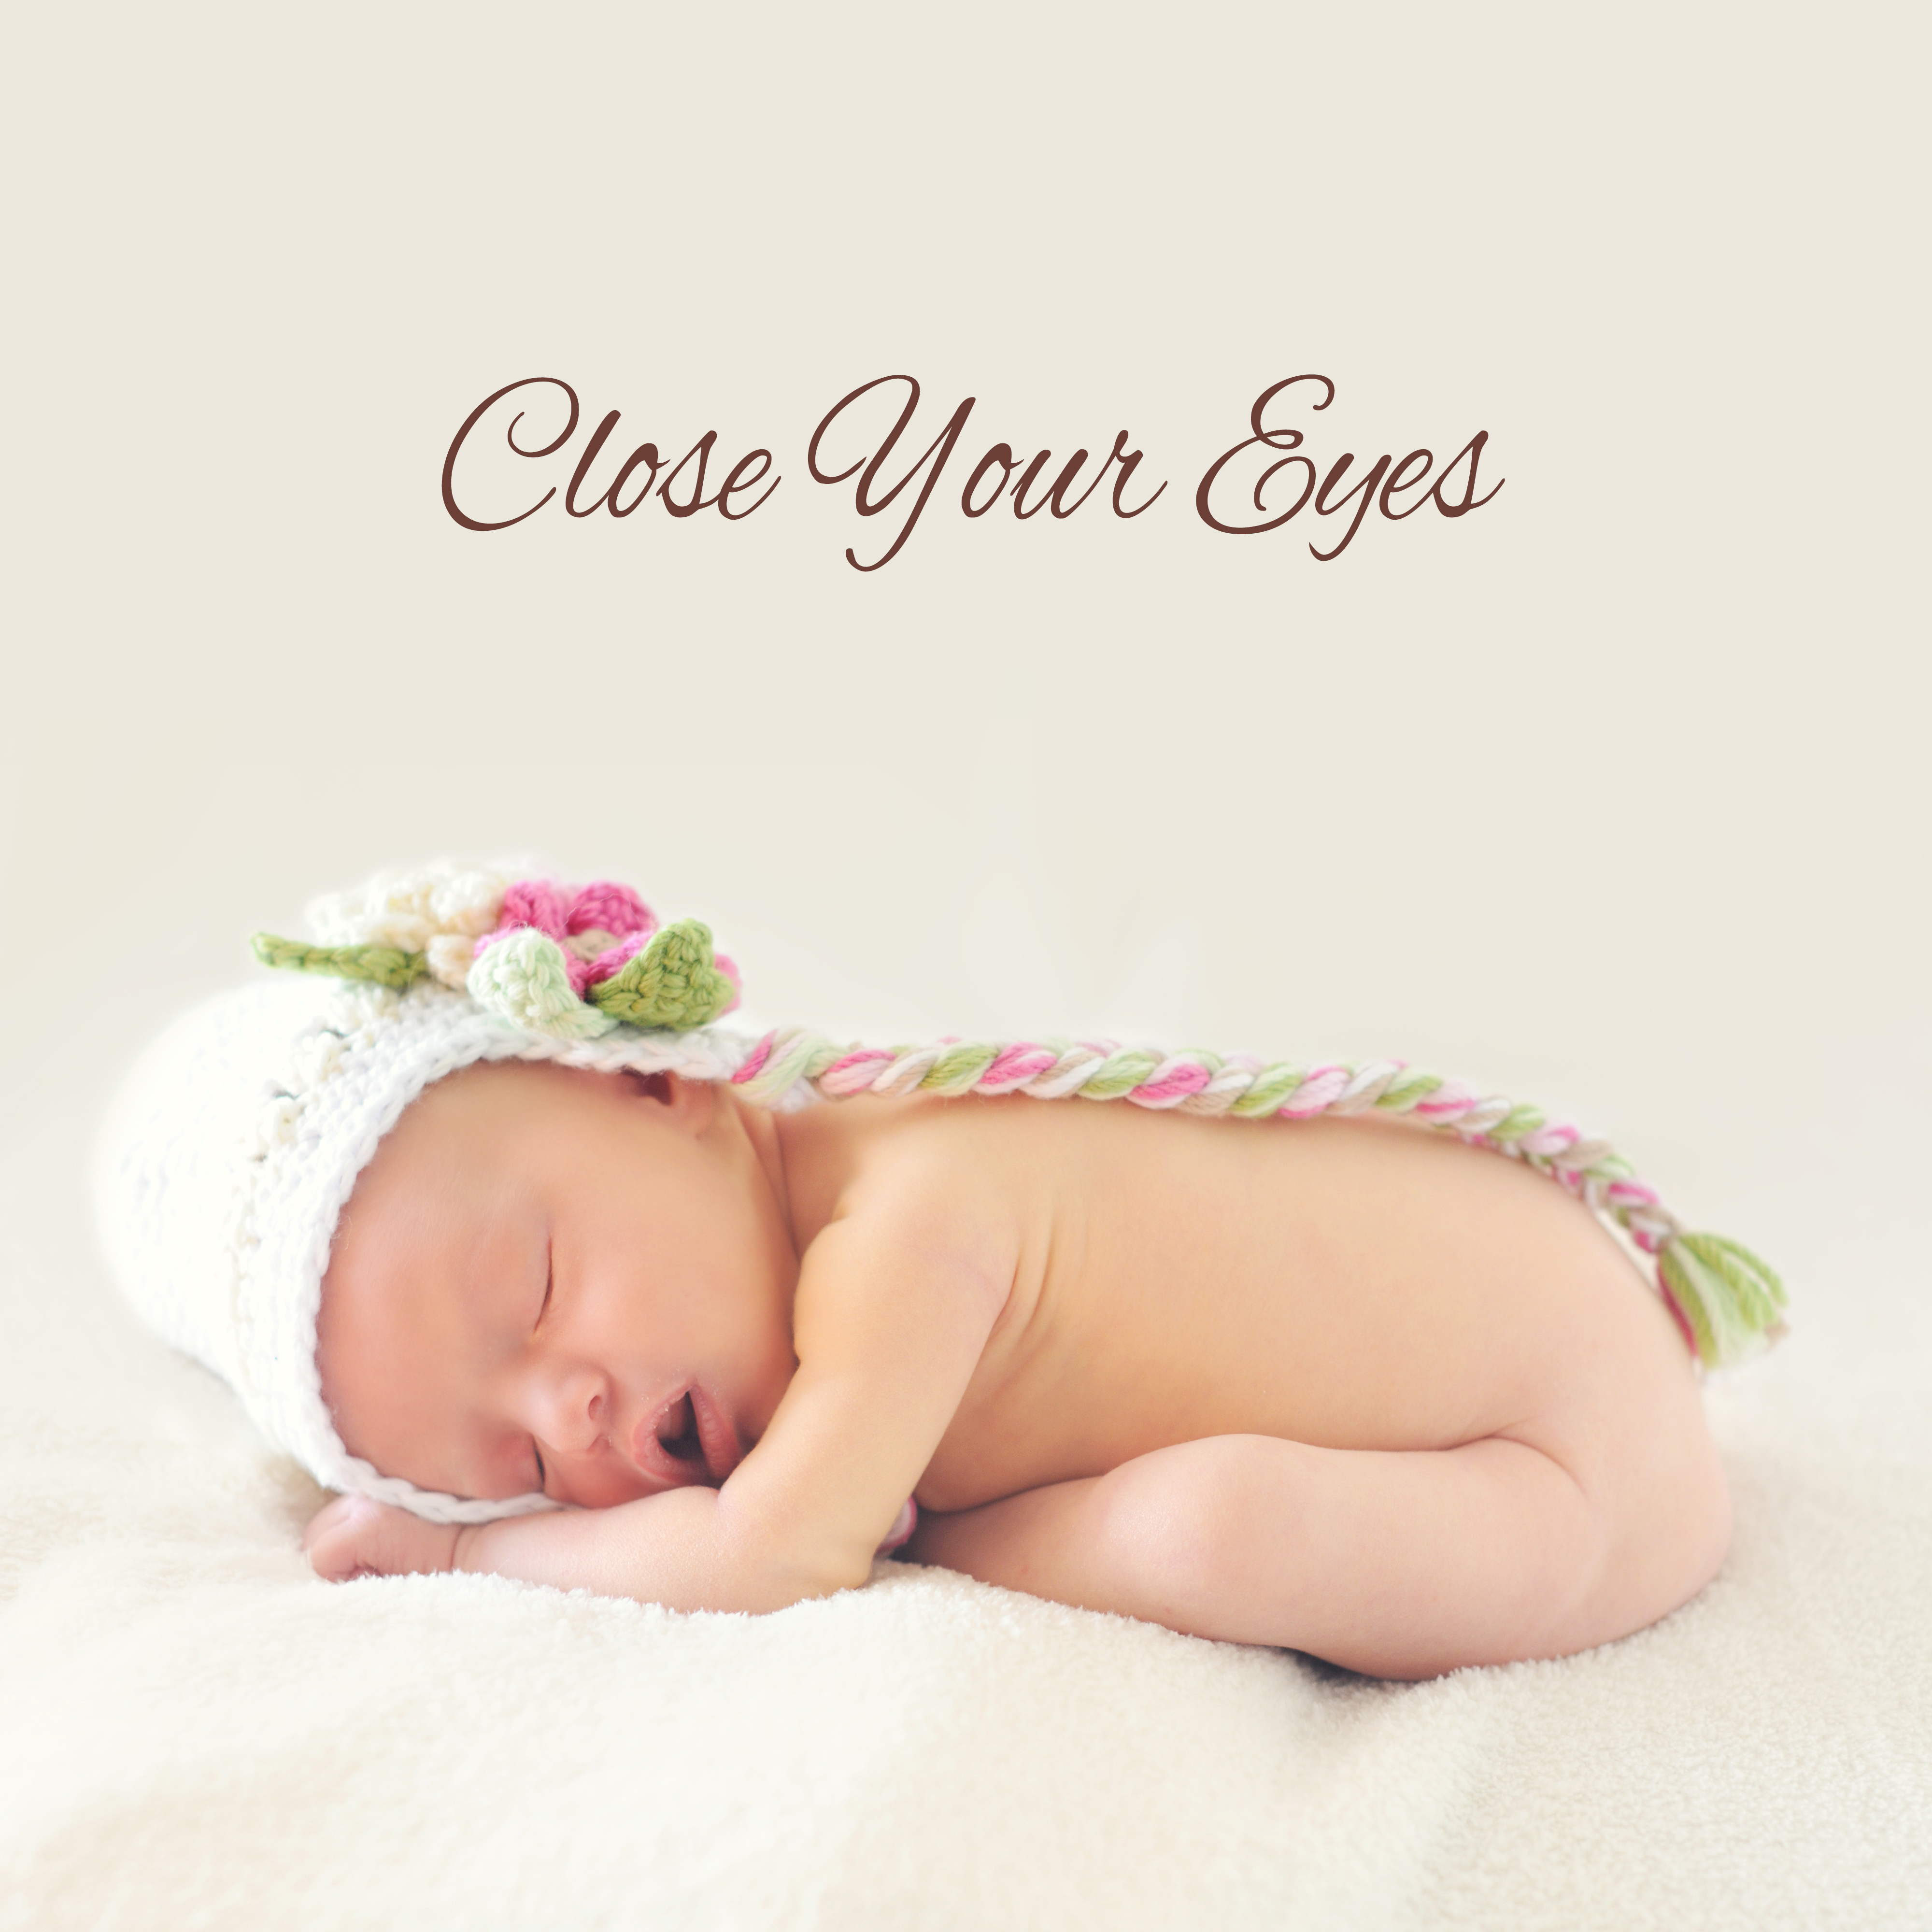 Close Your Eyes - Soft Nature Music for Your Baby to Relax, Fall Asleep and Sleep Through the Night, Baby Lullabies, Cradle Song